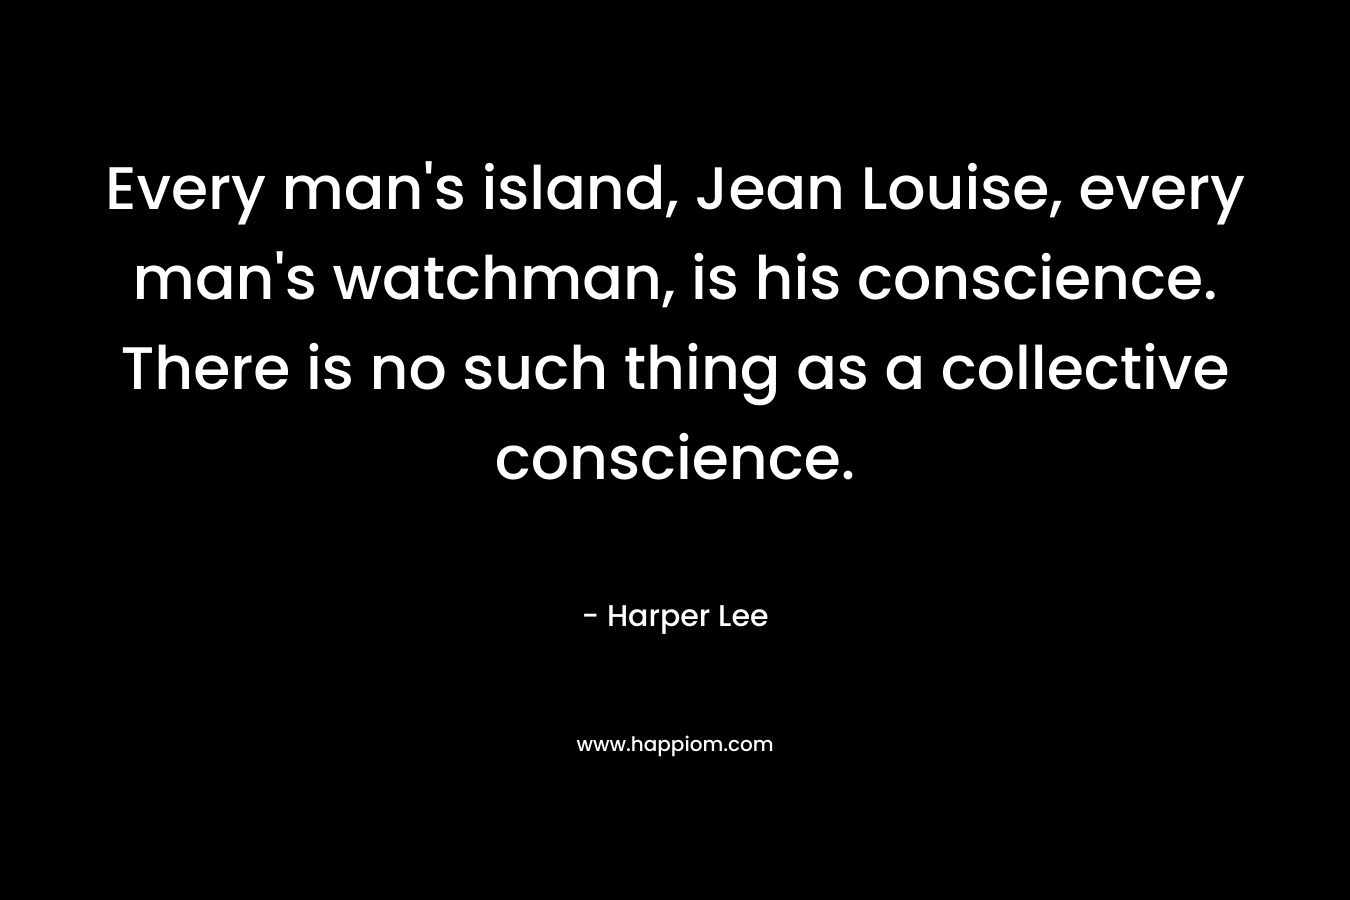 Every man's island, Jean Louise, every man's watchman, is his conscience. There is no such thing as a collective conscience.